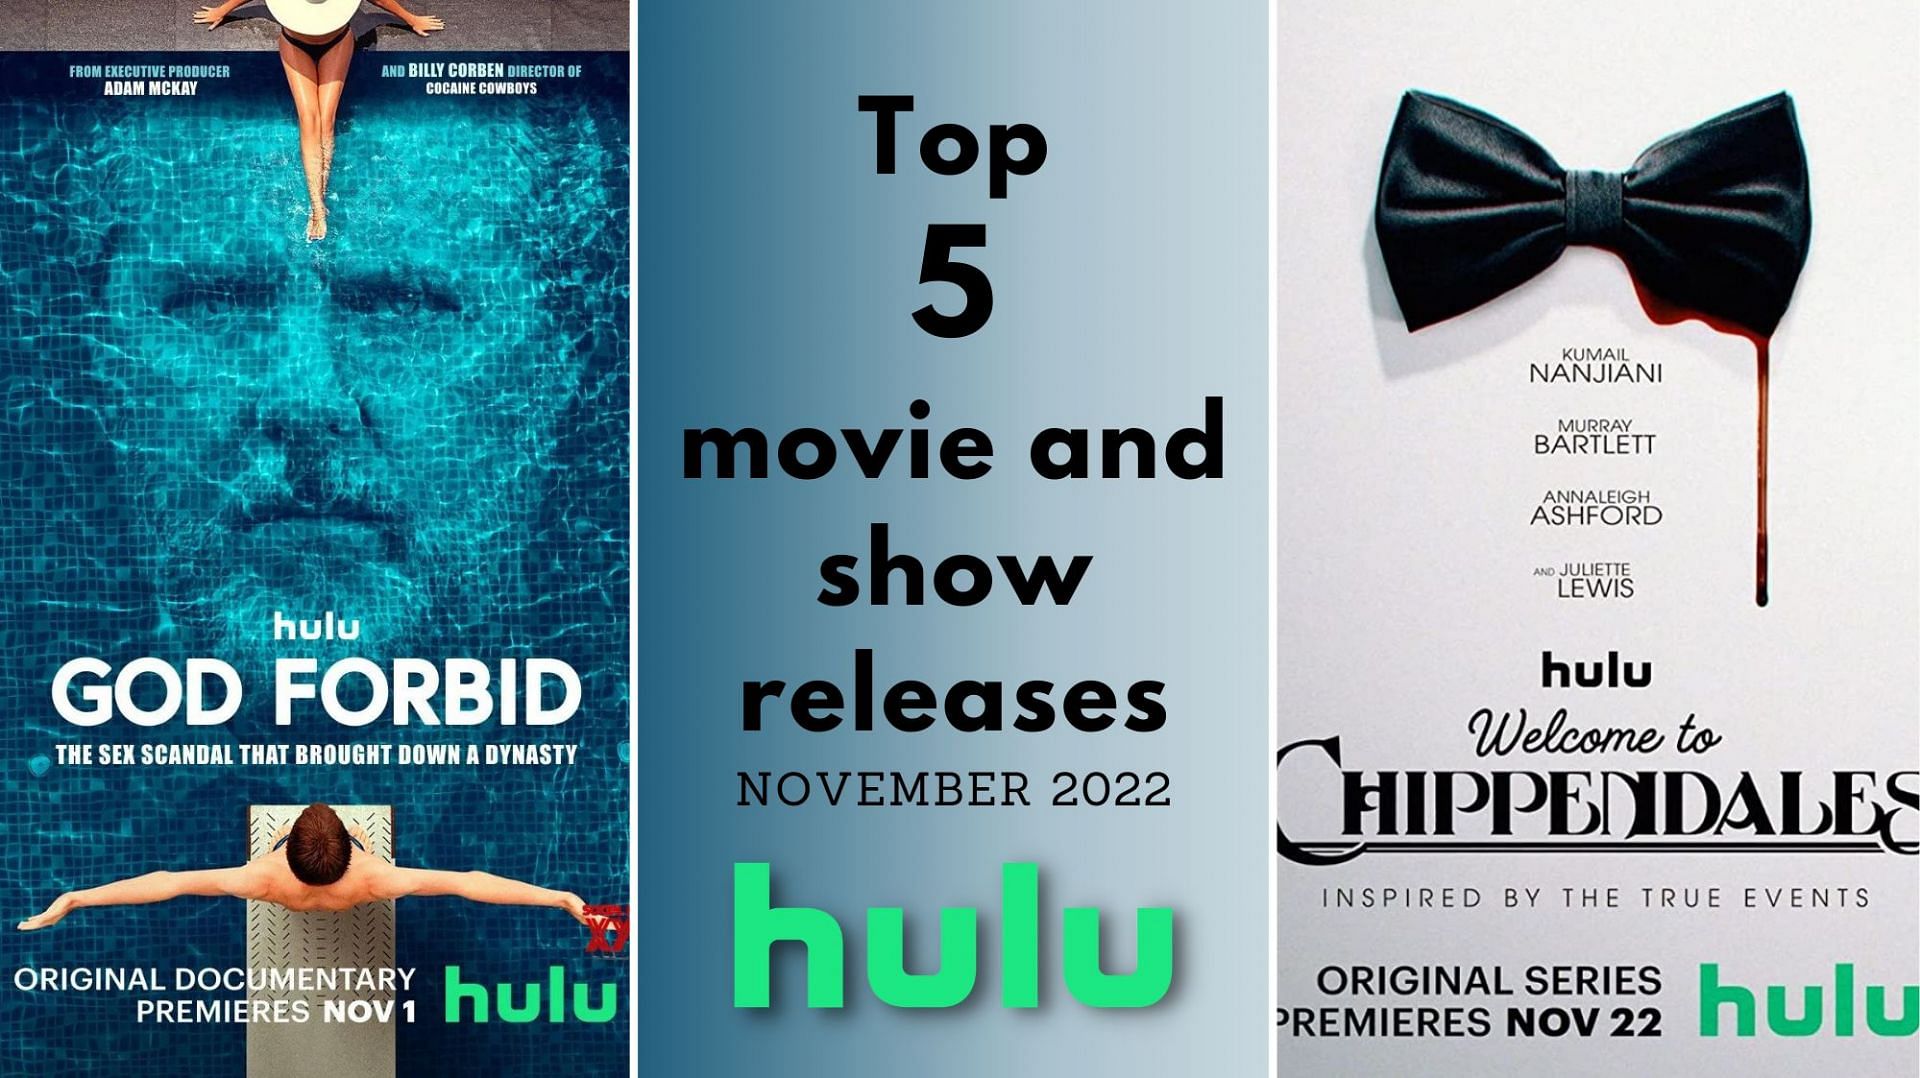 Hulu: Top 5 movie and show releases in November 2022 (Images via Hulu)